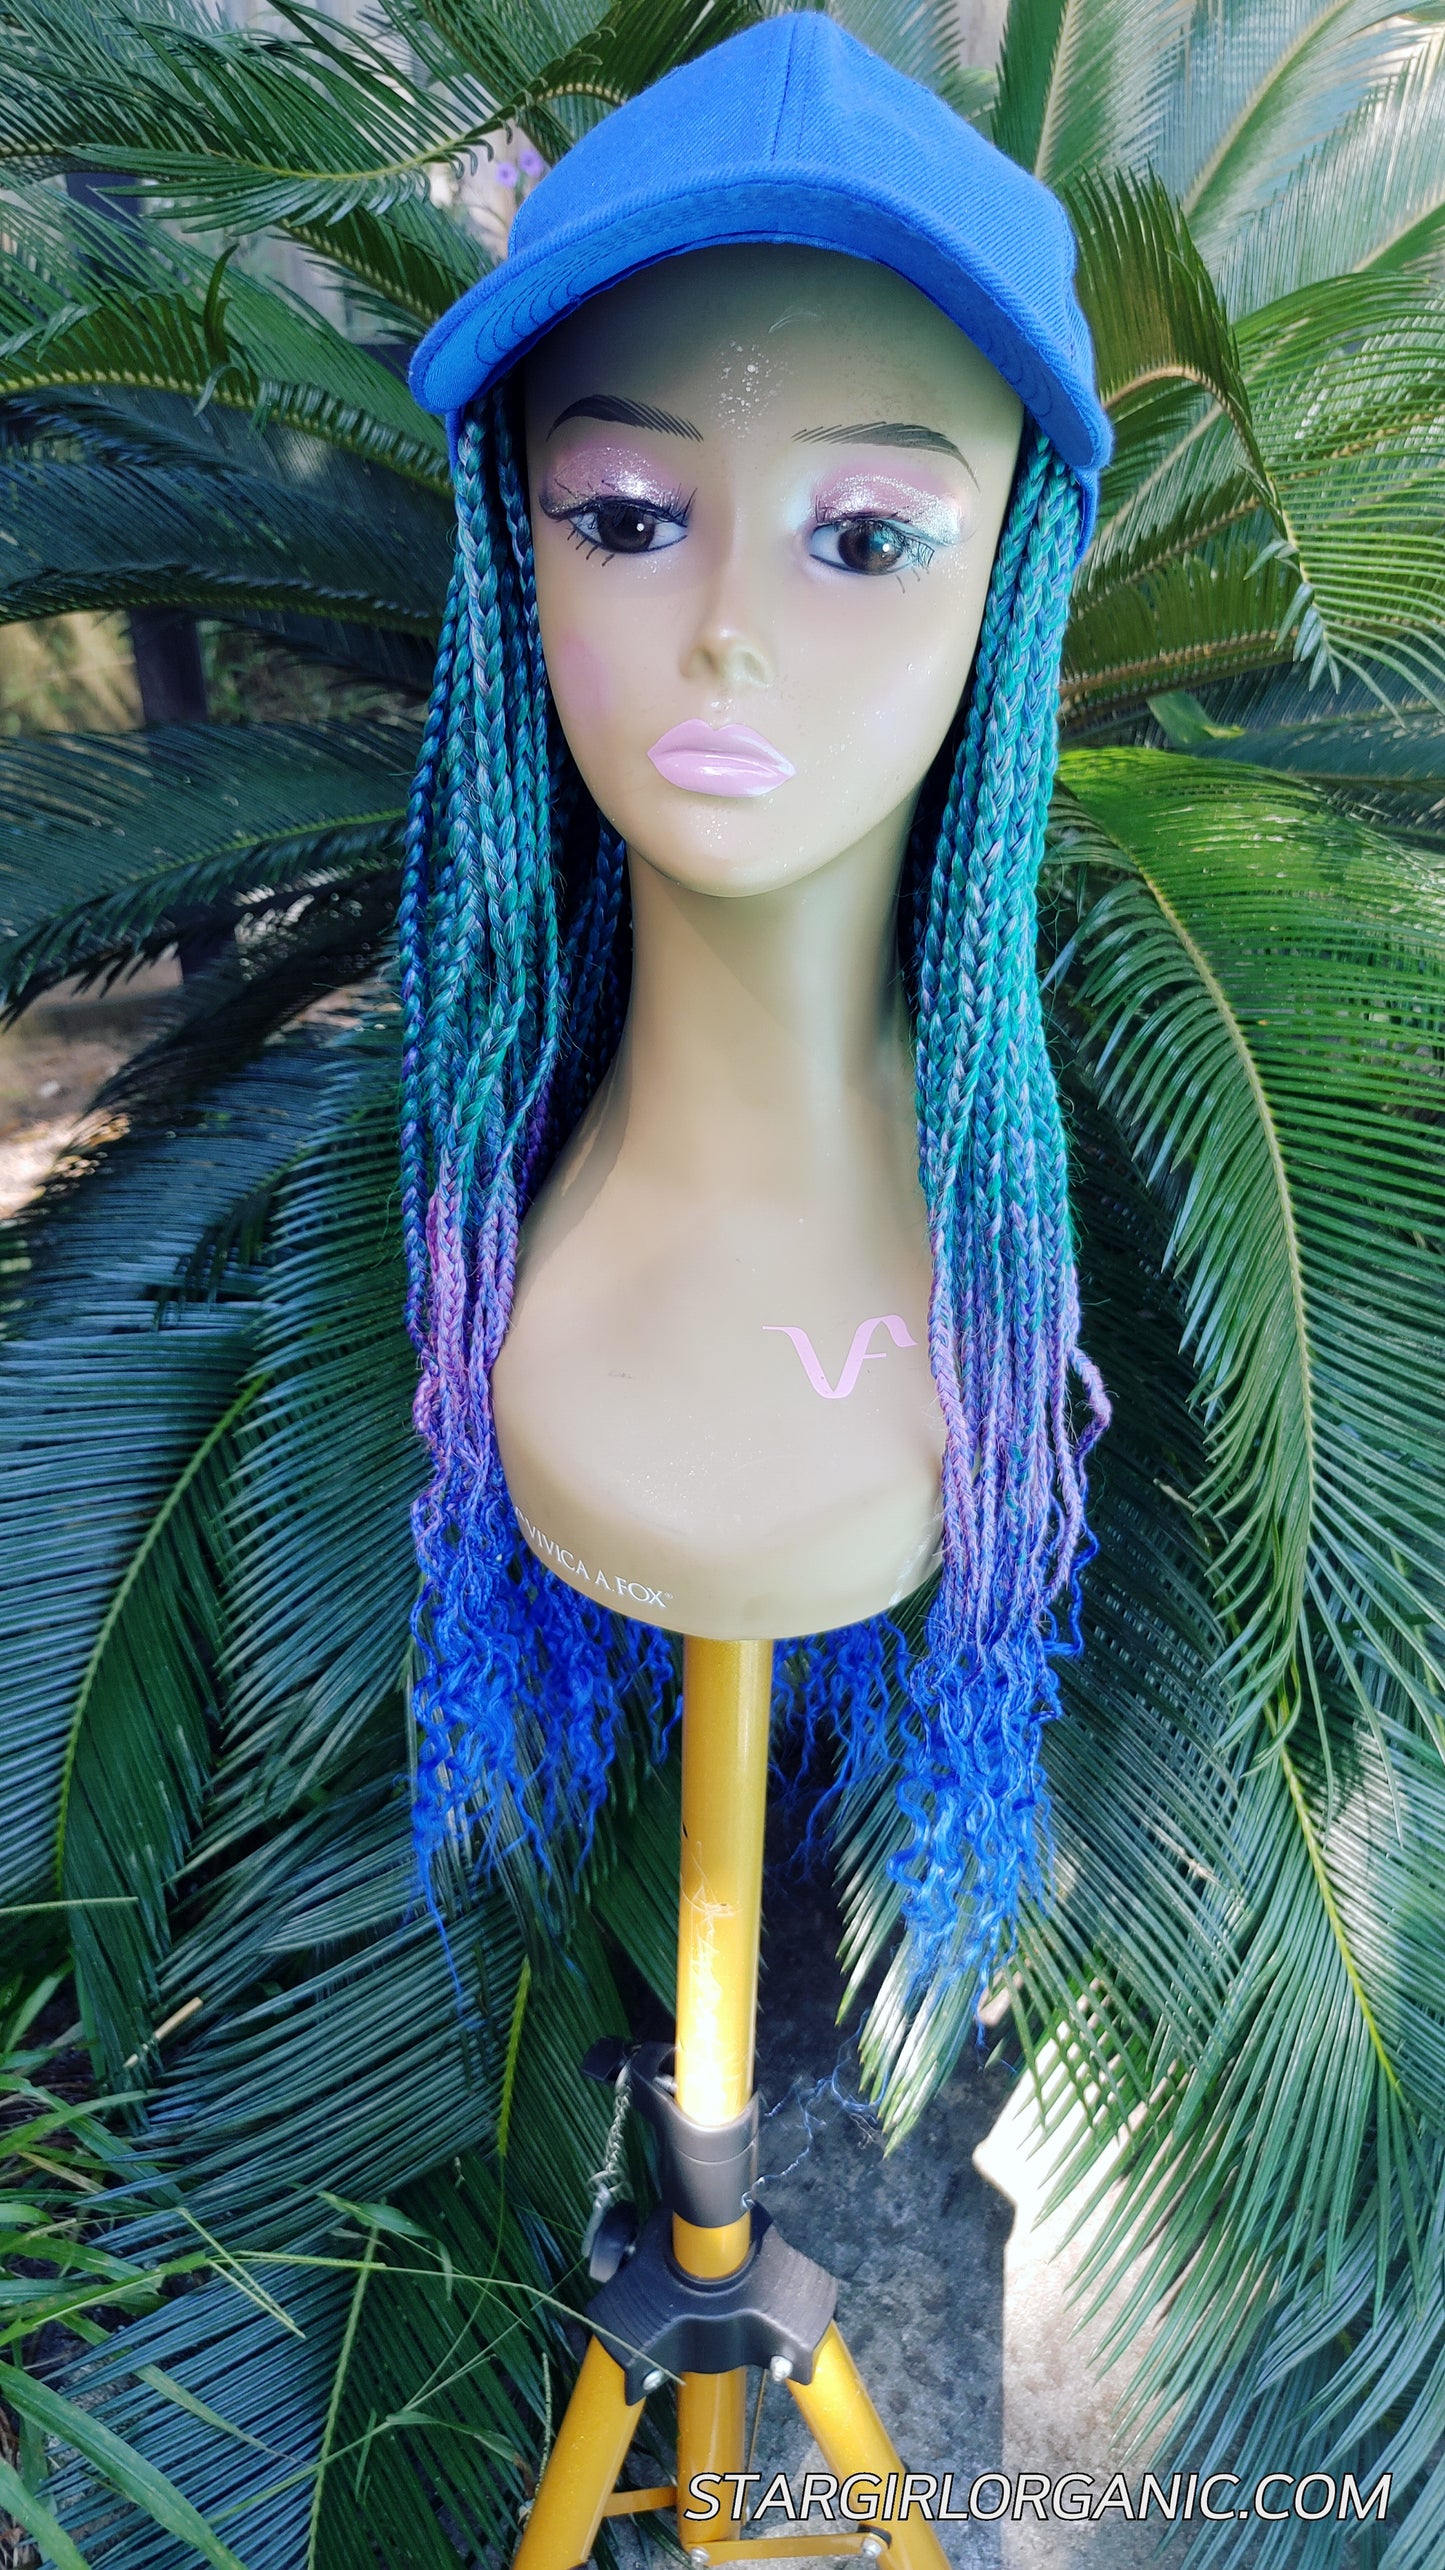 Braided Adjustable Cap Wig With Blue or Army Baseball Cap